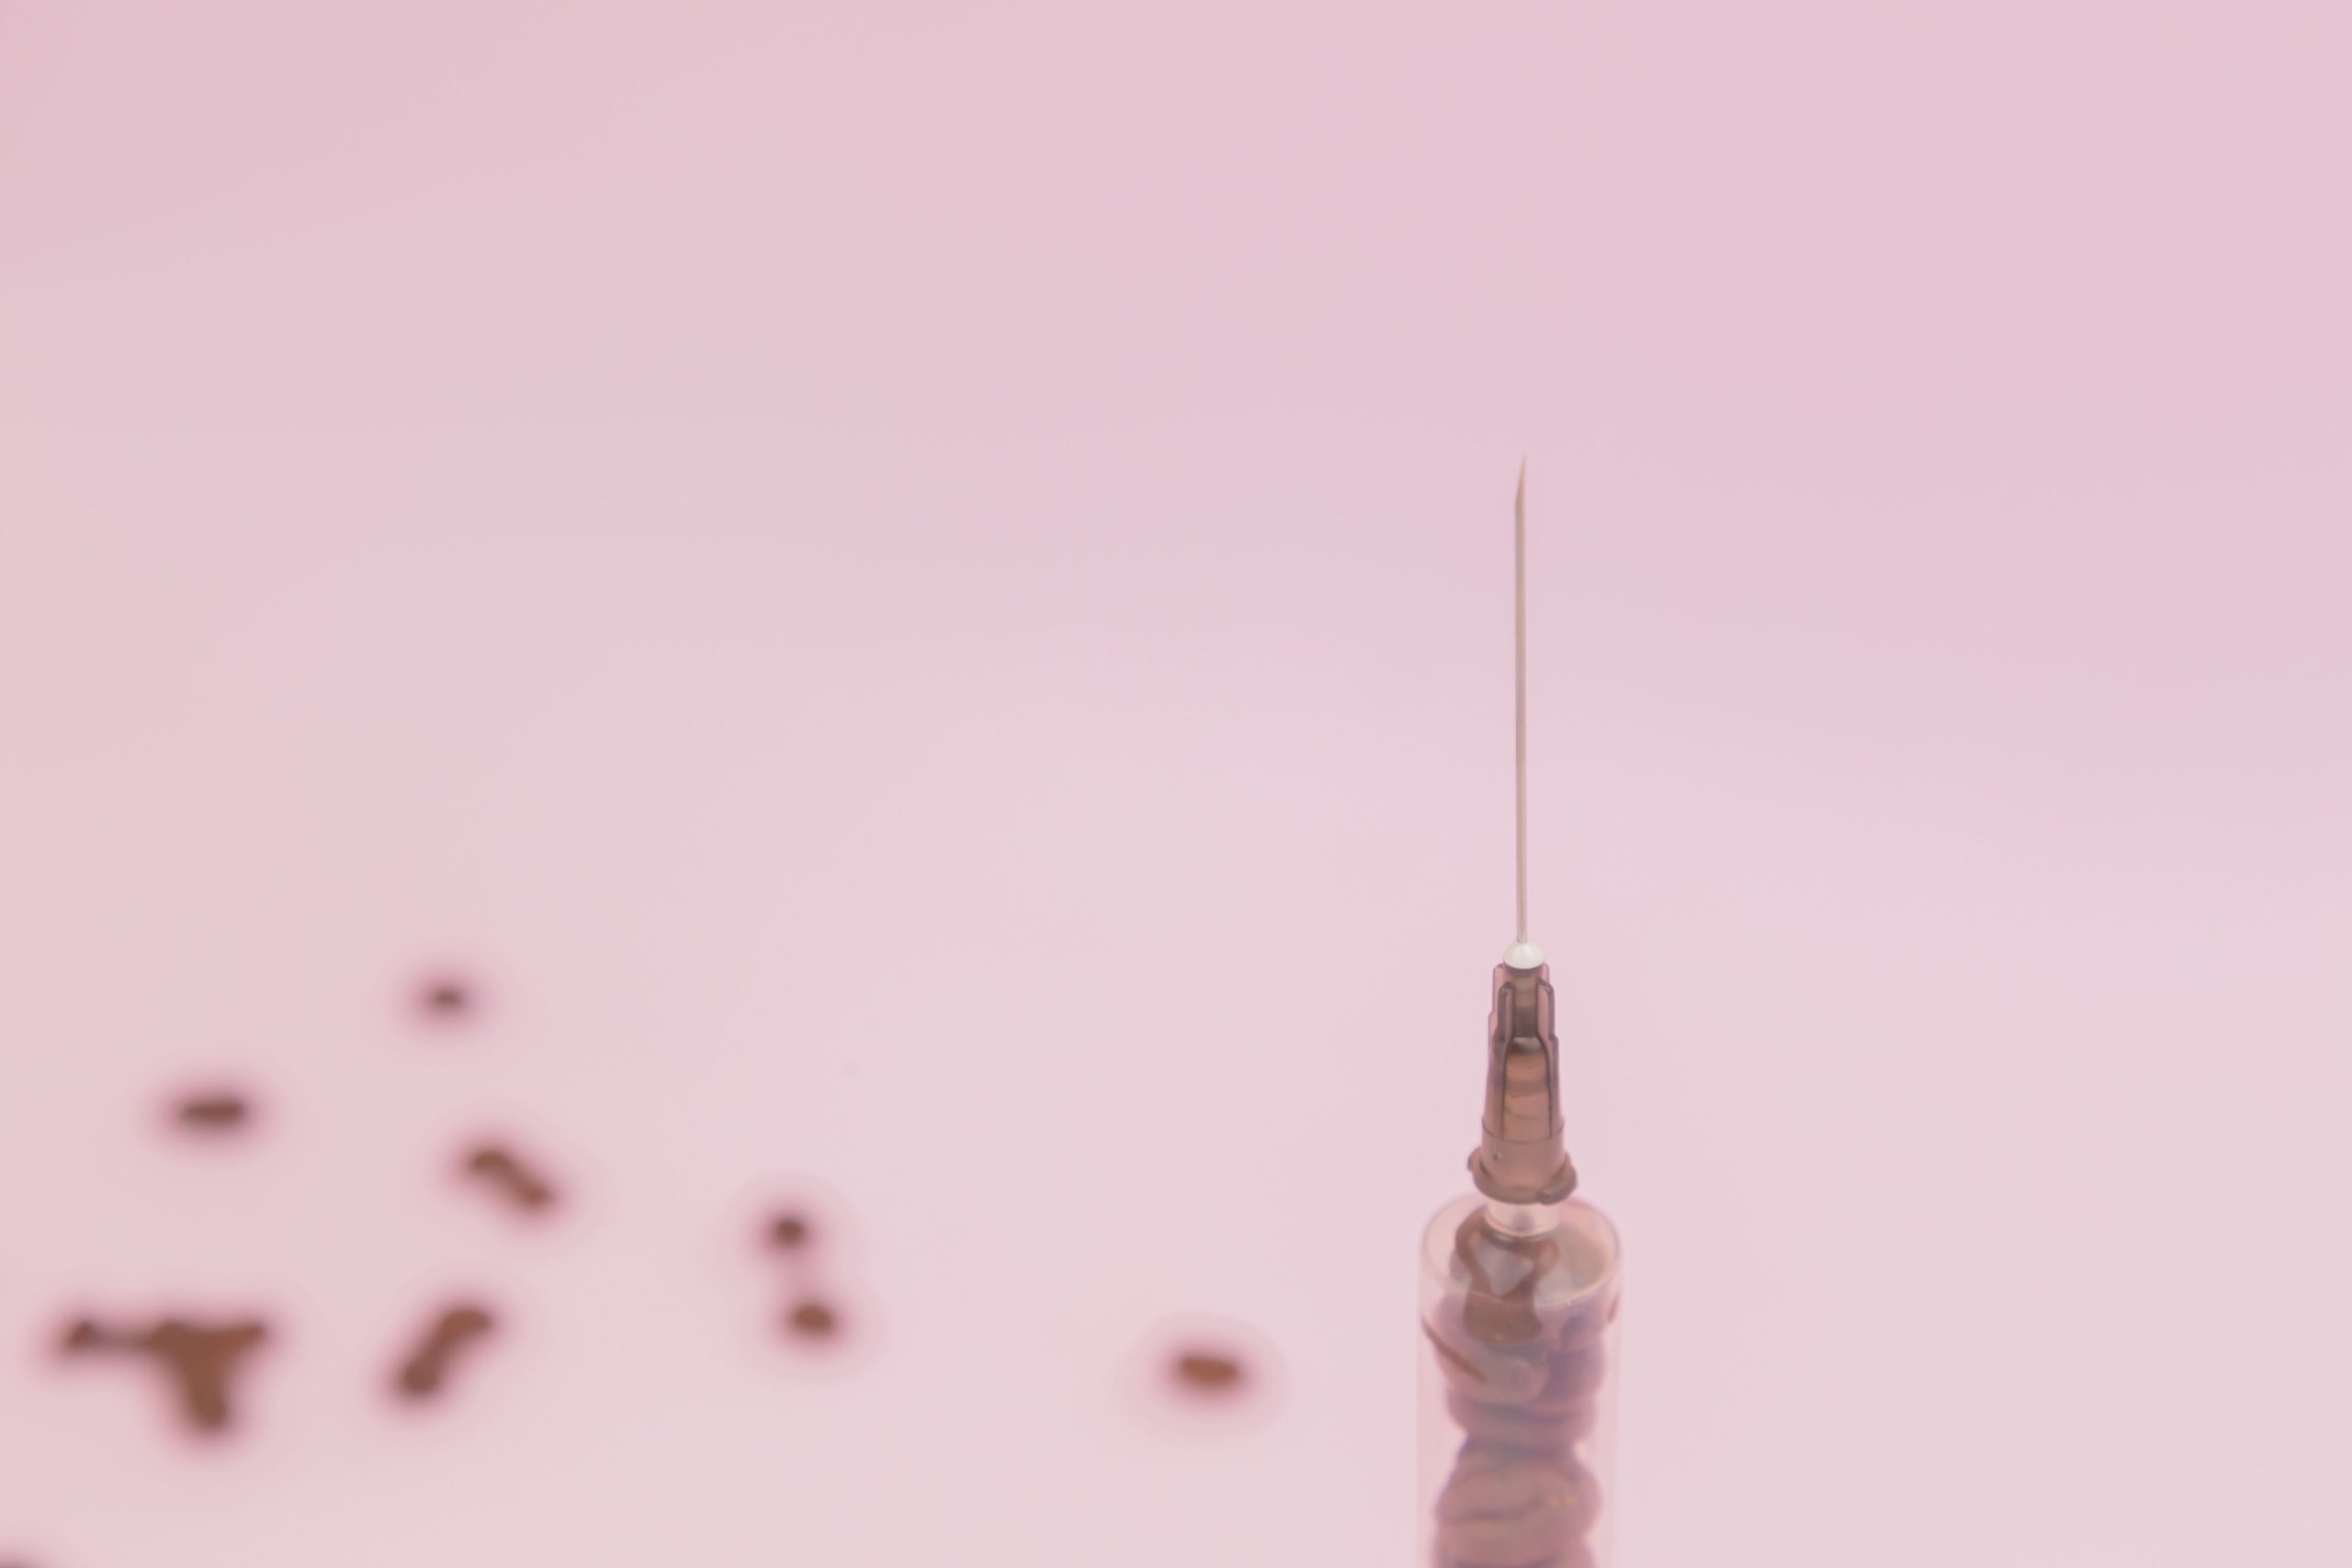 Photograph of a hypodermic needle